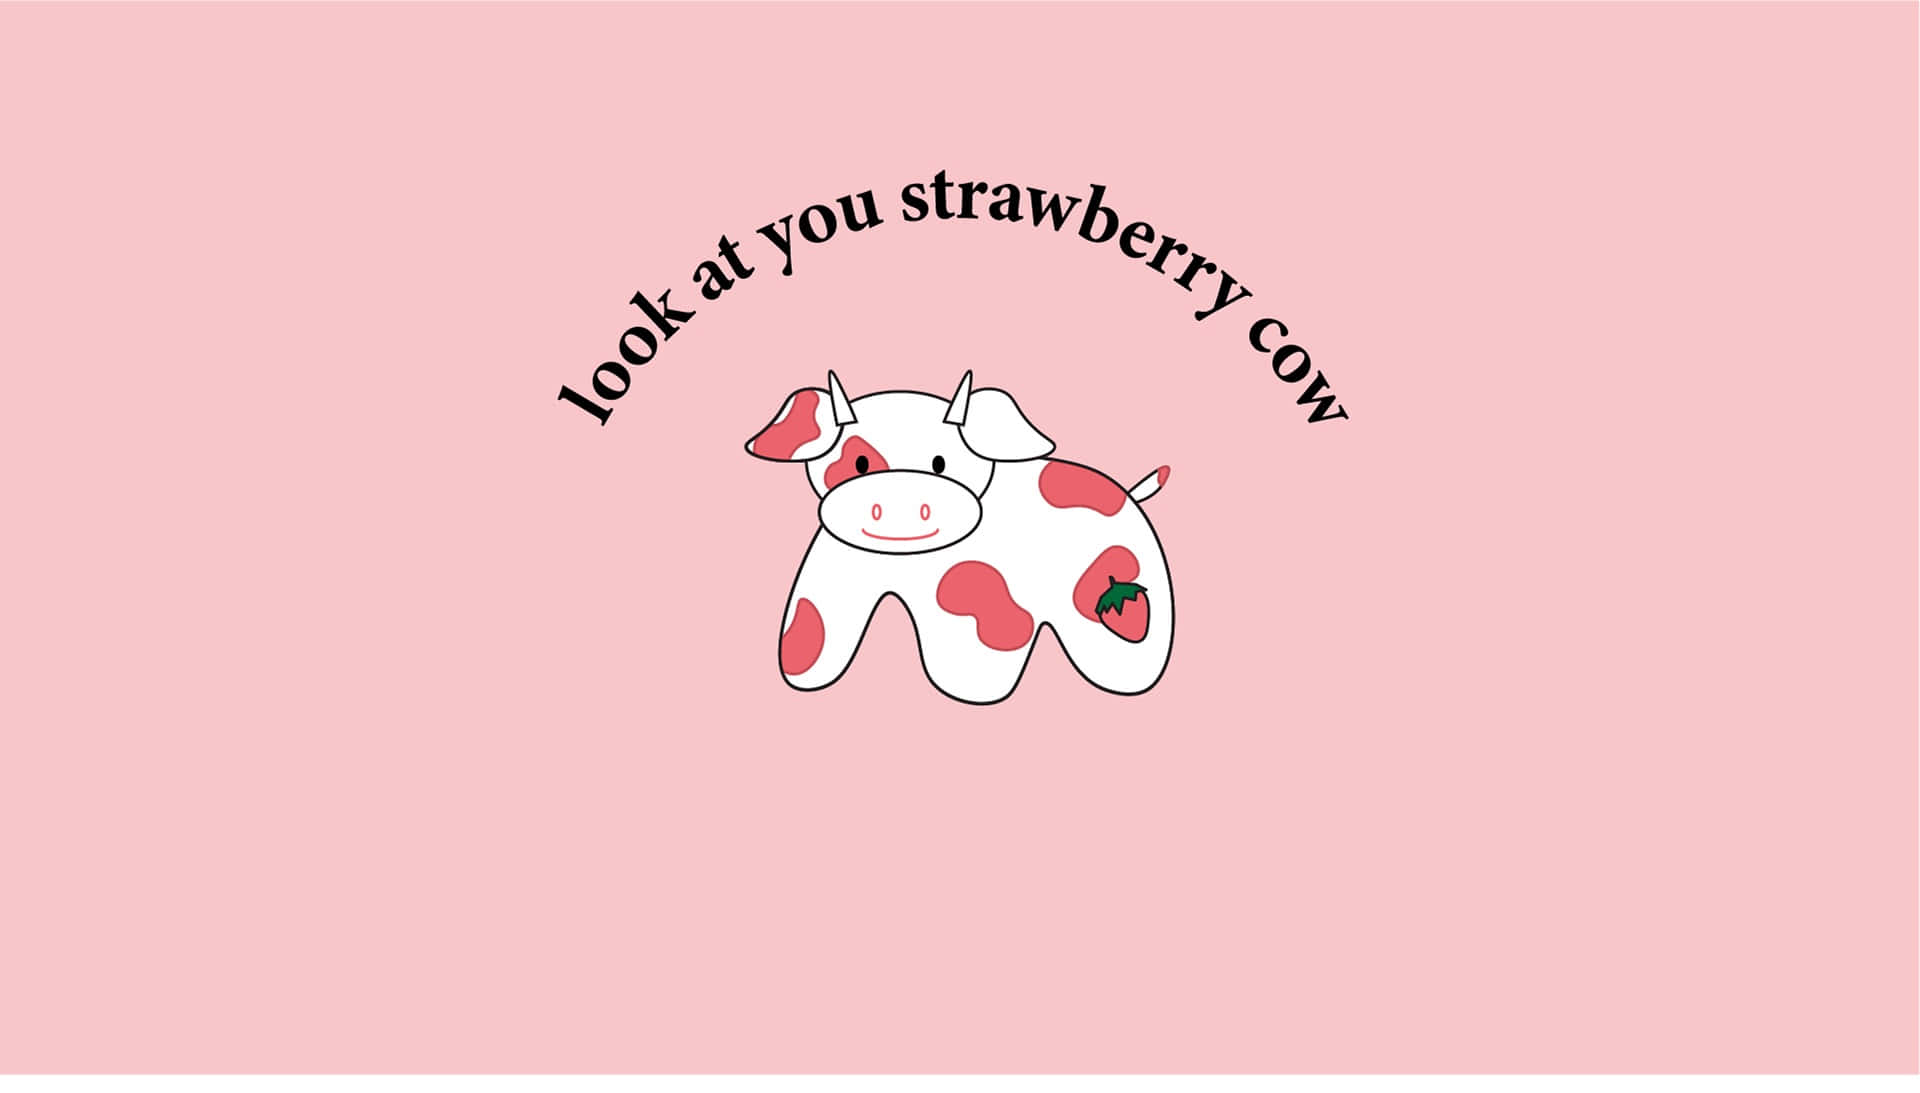 A playful Strawberry Cow grazing in a whimsical field